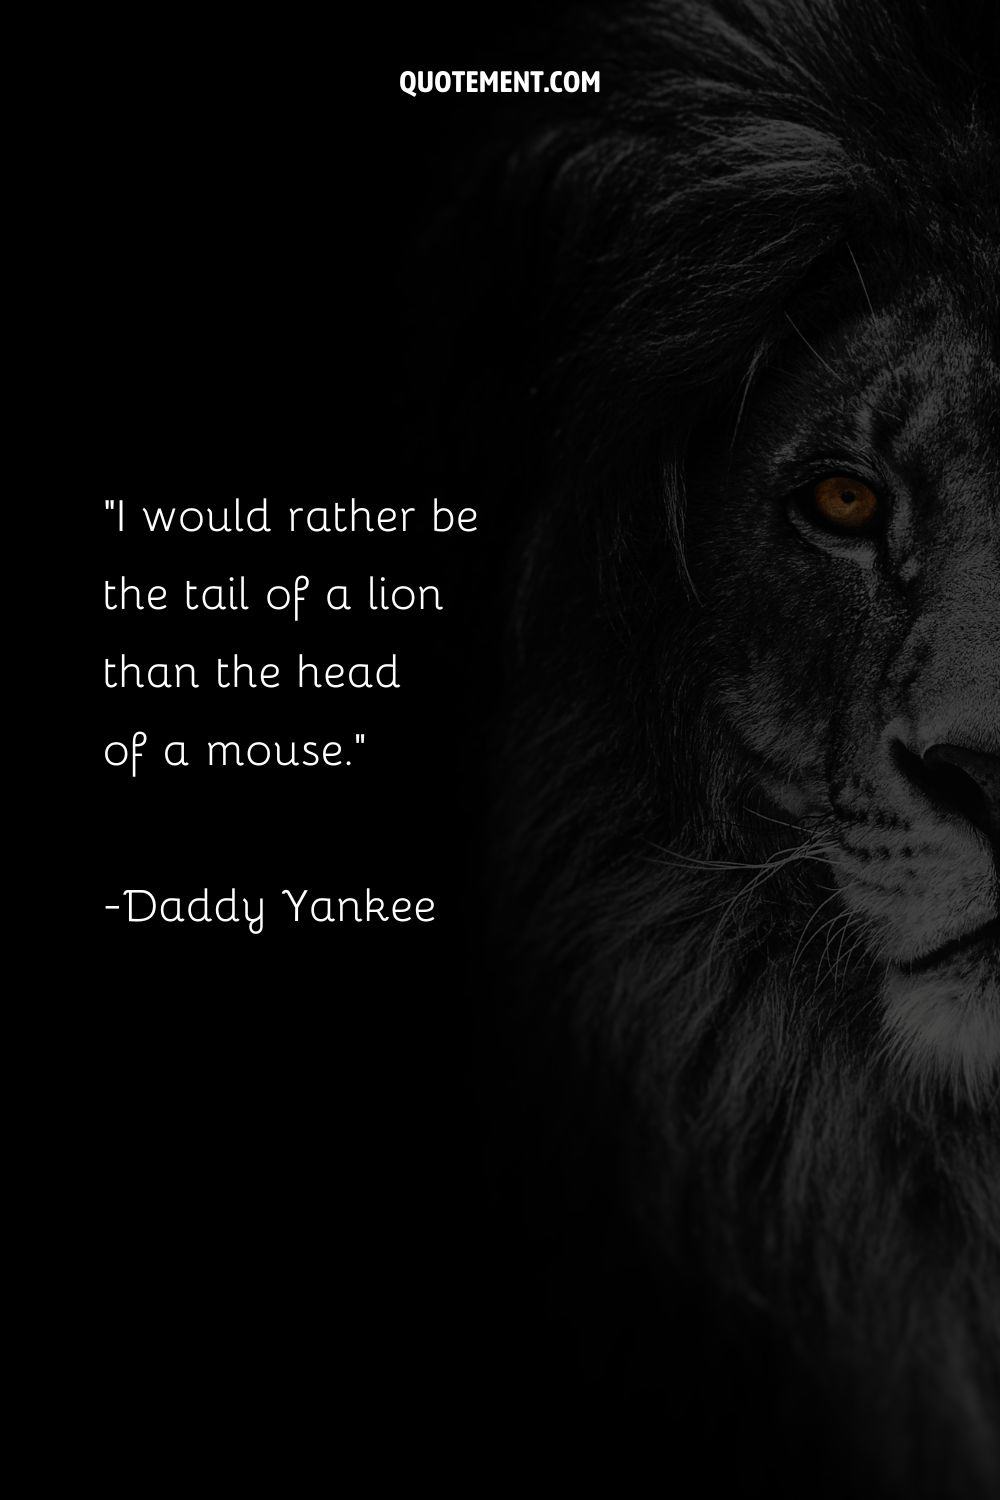 I would rather be the tail of a lion than the head of a mouse